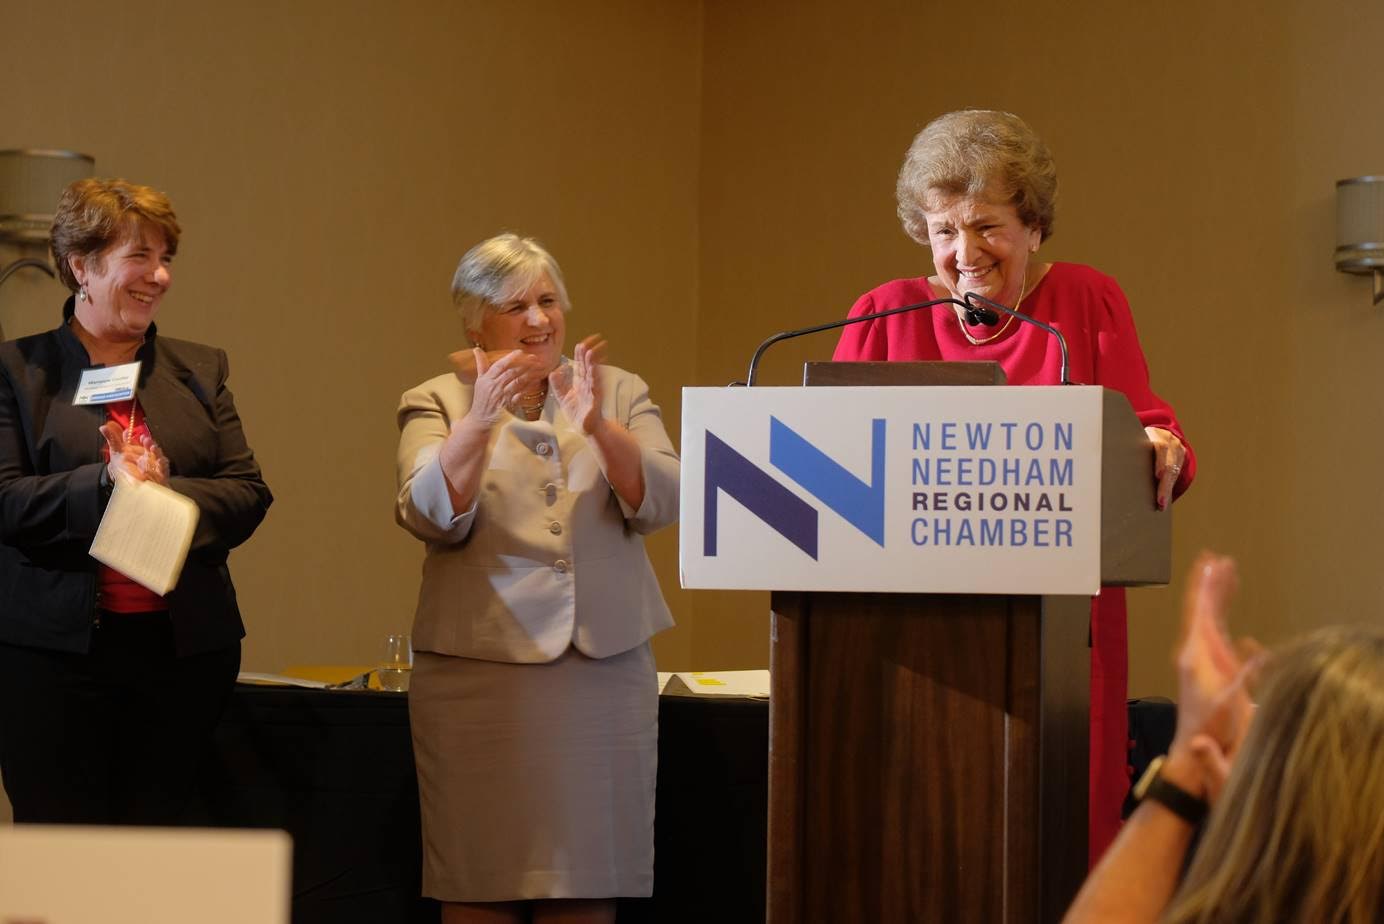 Louise Condon accepts the Newton-Needham Regional Chamber’s honor for decades of unparalleled service to the town at the First Annual Needham Night dinner Jan. 31 at the Sheraton. The award was presented by, from left, Needham Select Chair Marianne Cooley and State Rep. Denise Garlick.... 			
			</div data-eio=